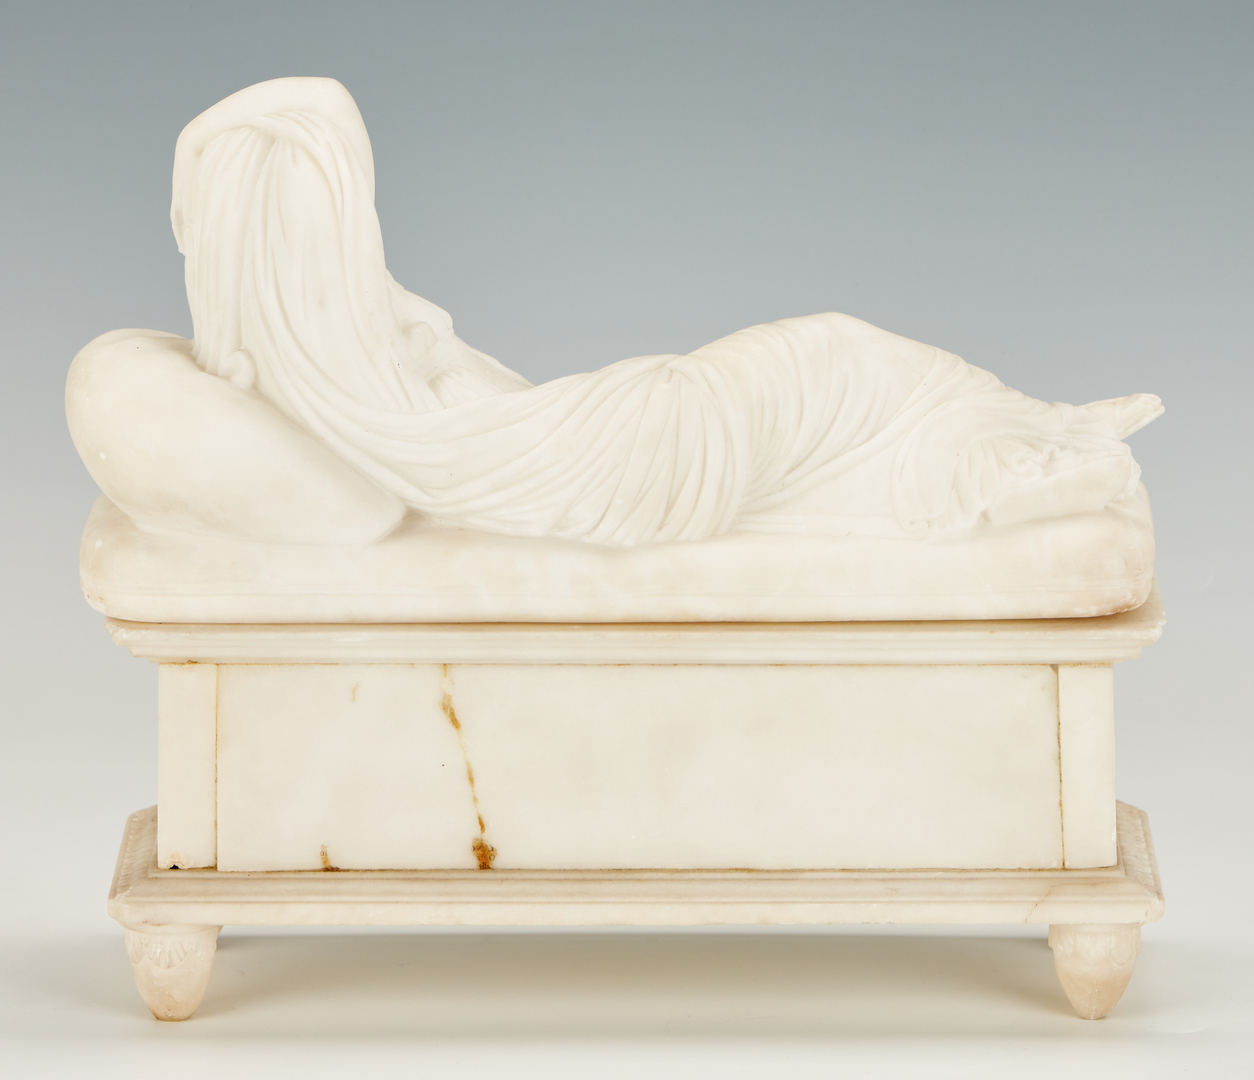 Lot 161: European Marble Sculpture of a Reclining Woman, after Antonio Canova